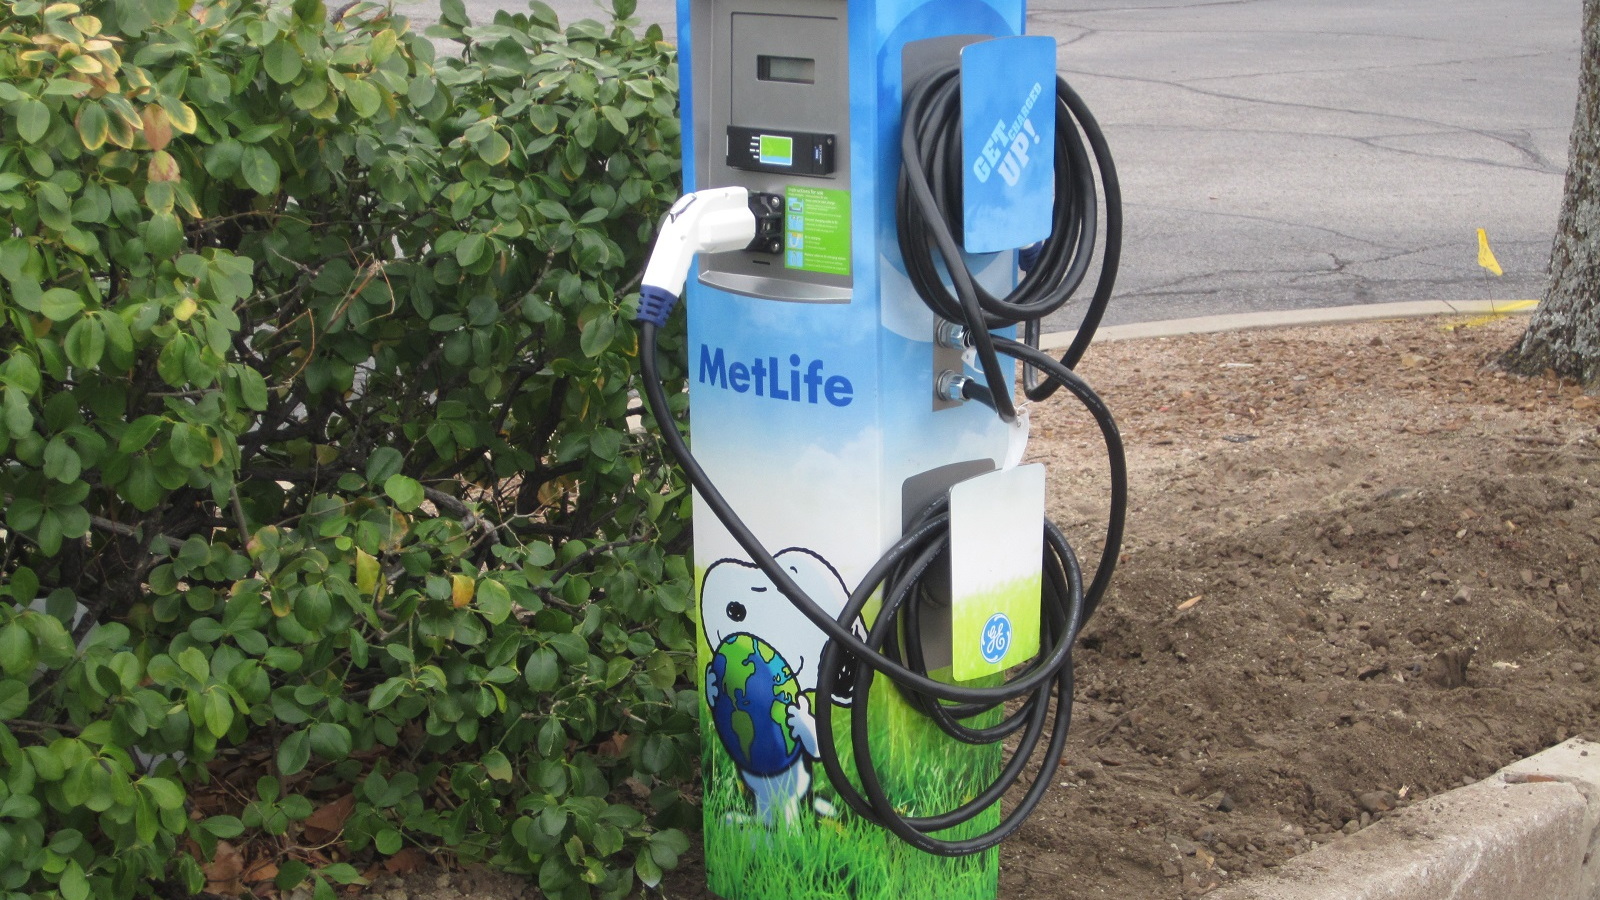 MetLife electric-car charging station for employee use